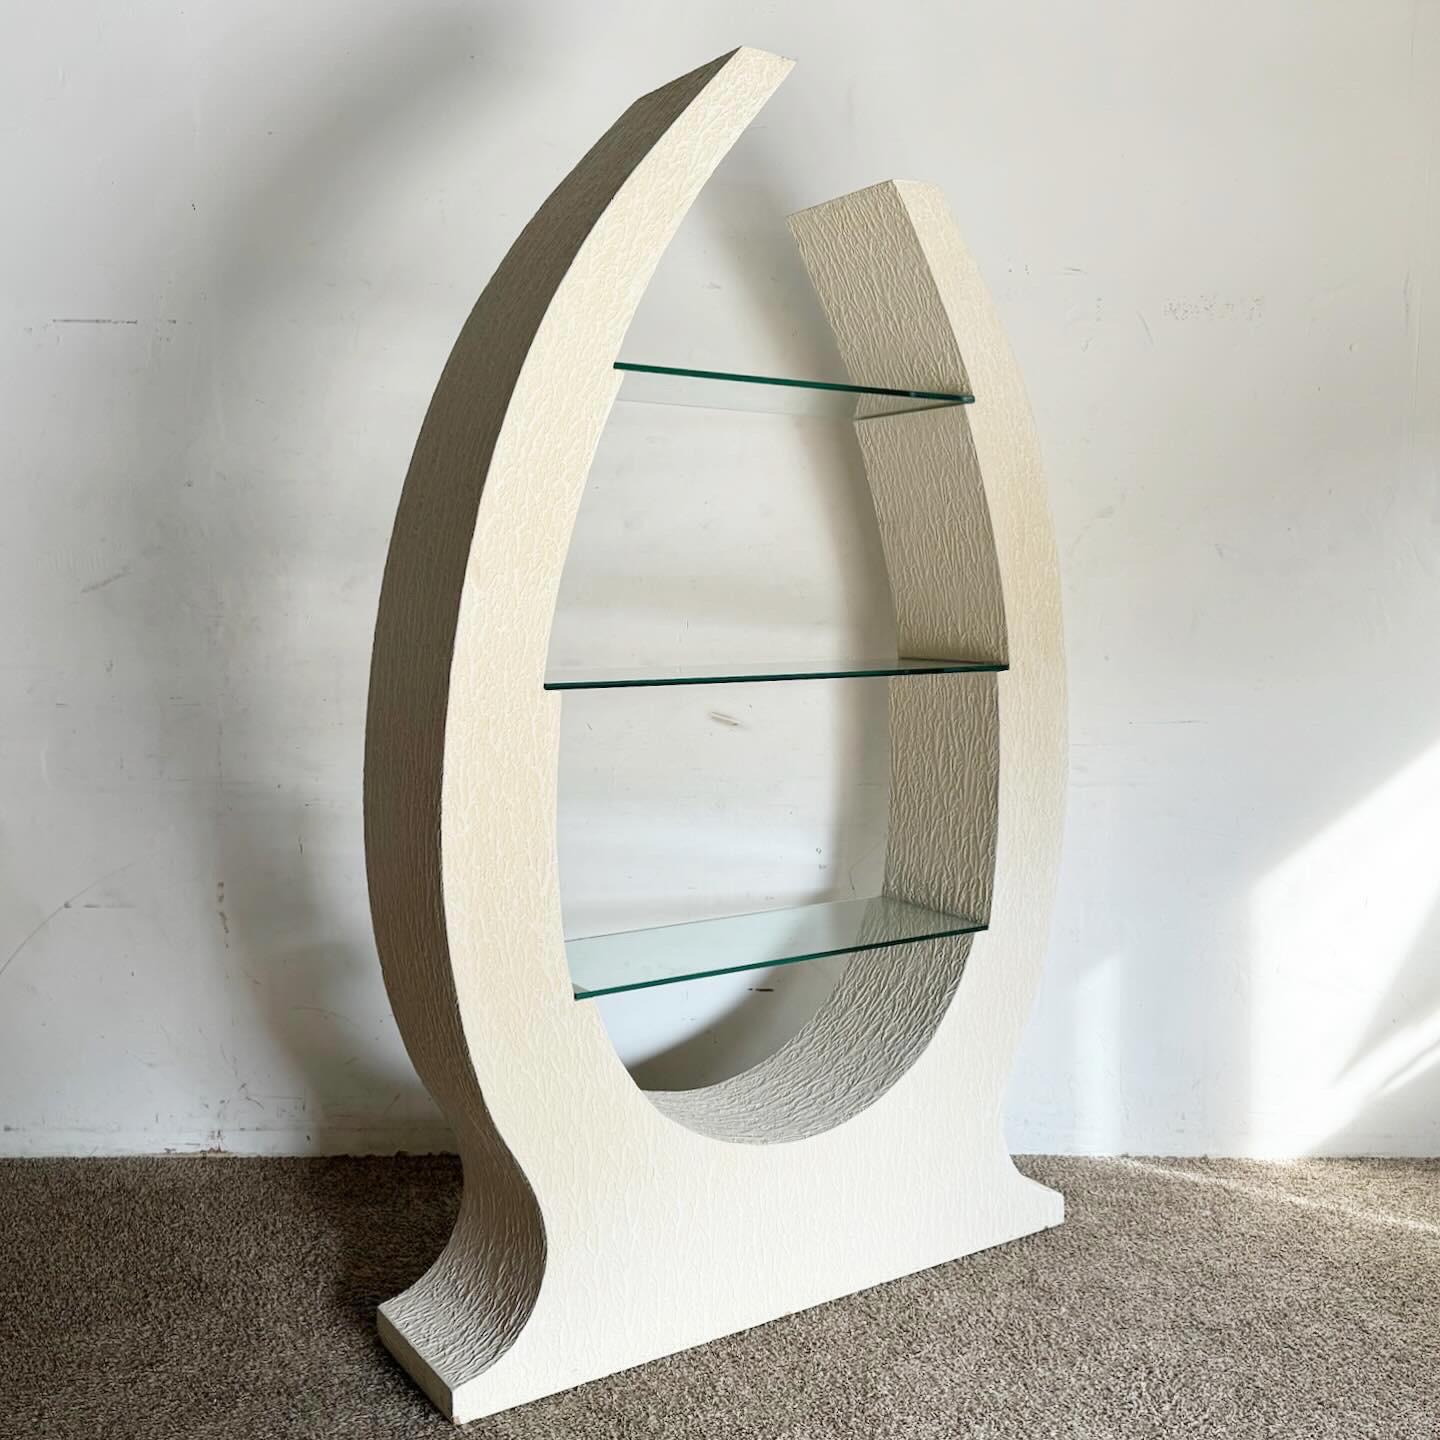 The Postmodern Sculpted White Stucco Etagere/Bookshelf is a unique addition to any space, blending artistic design with functionality. Its sculpted form and white stucco finish add a contemporary and dynamic touch, suitable for various decor styles.